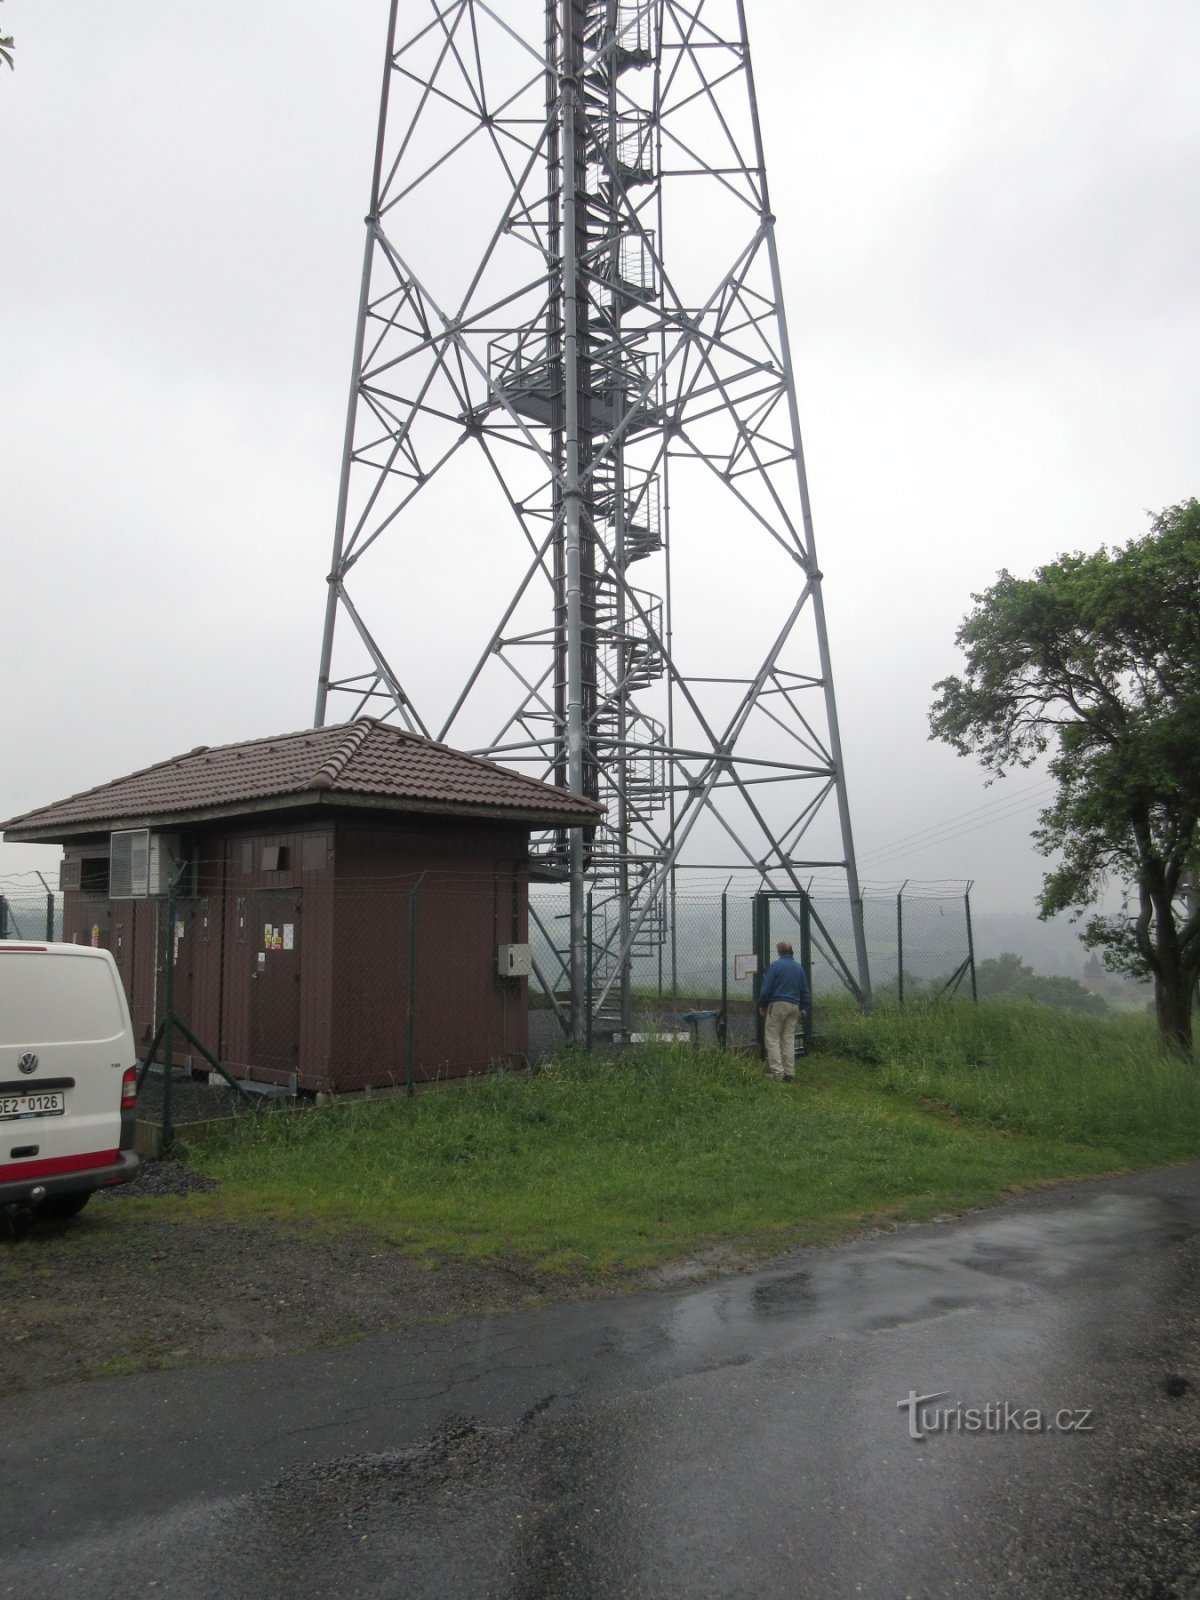 Lookout tower Petrovice II